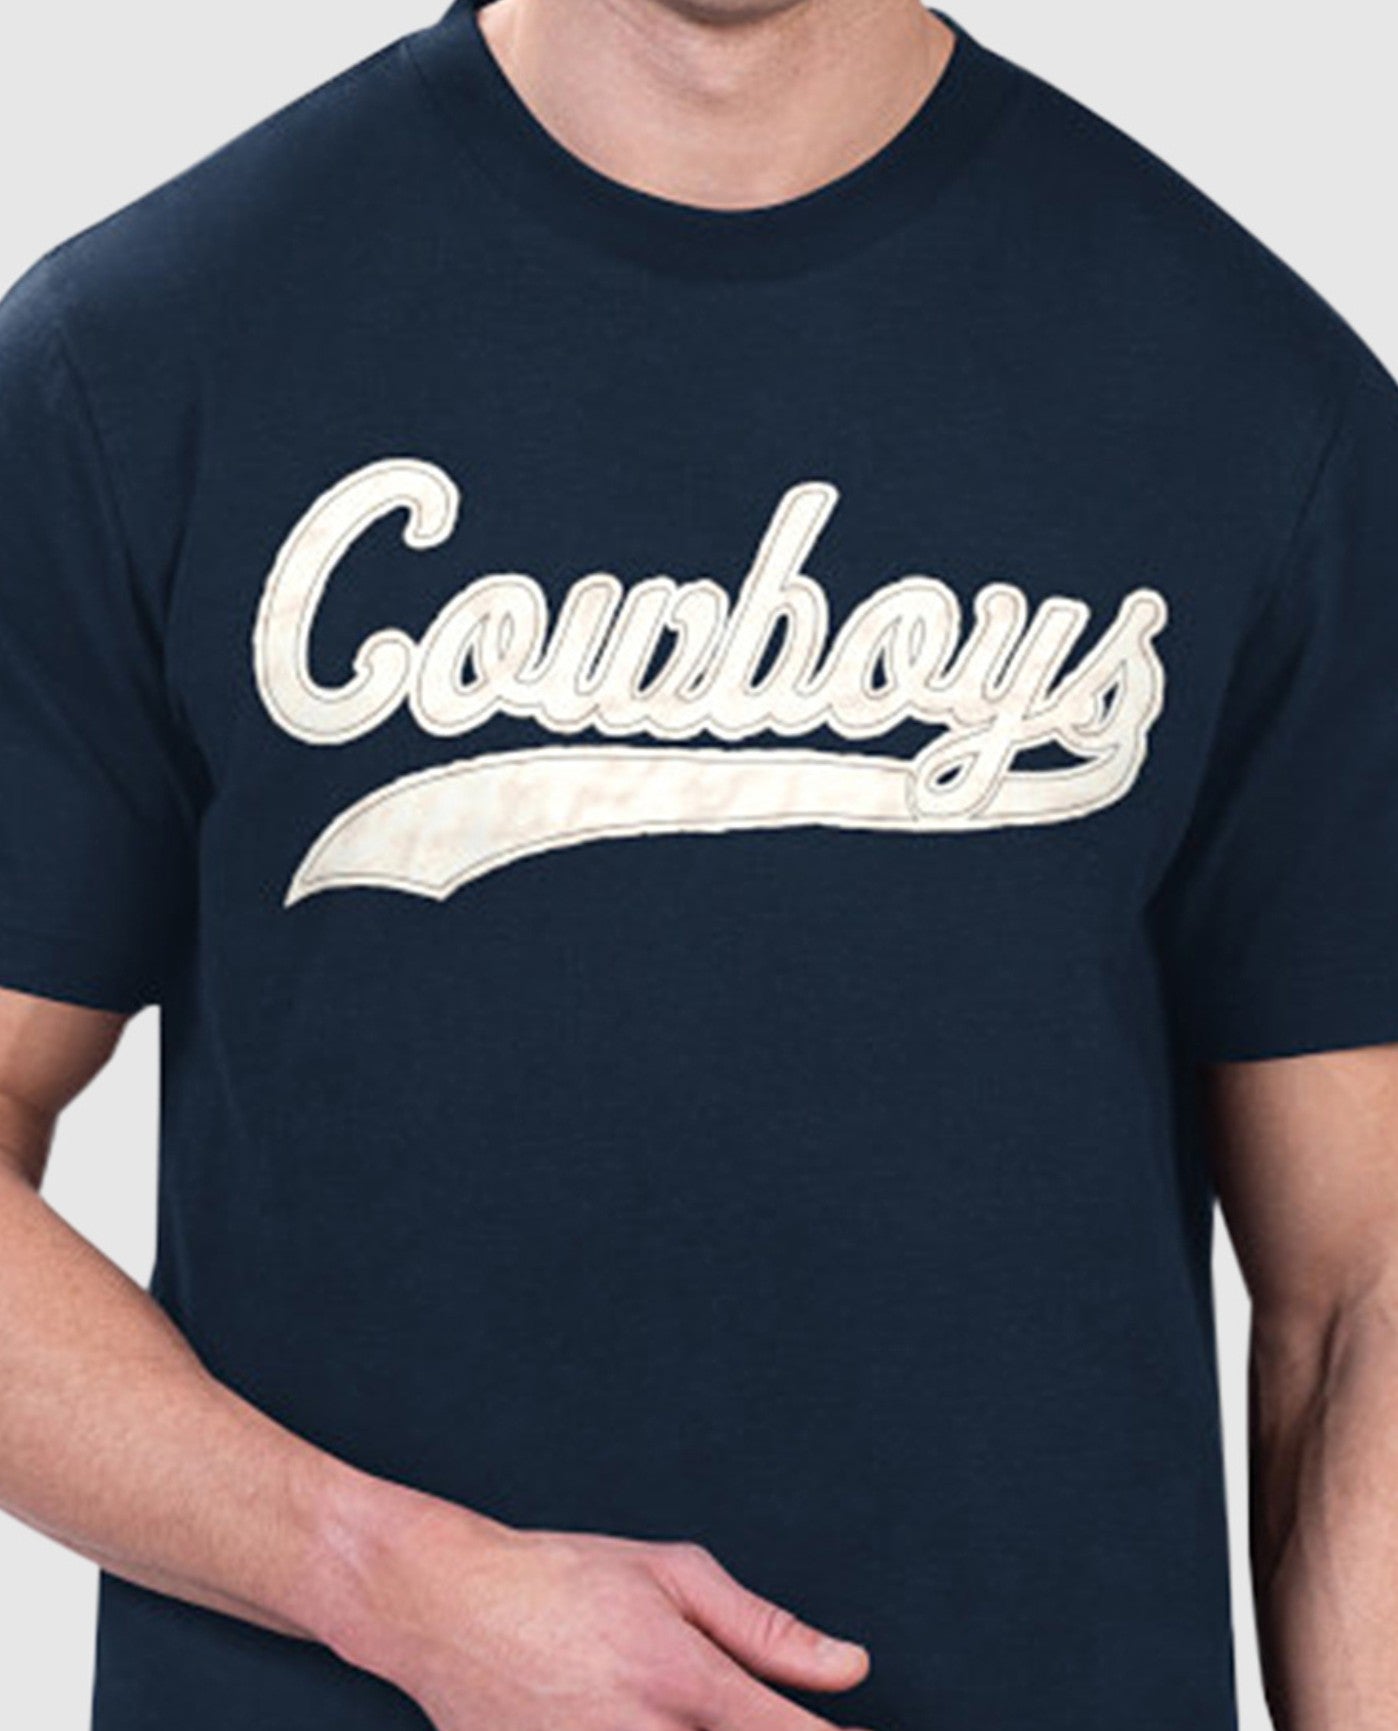 Front Logo on Chest of Dallas Cowboys Catch Short Sleeve Tee Shirt | Cowboys Royal Blue